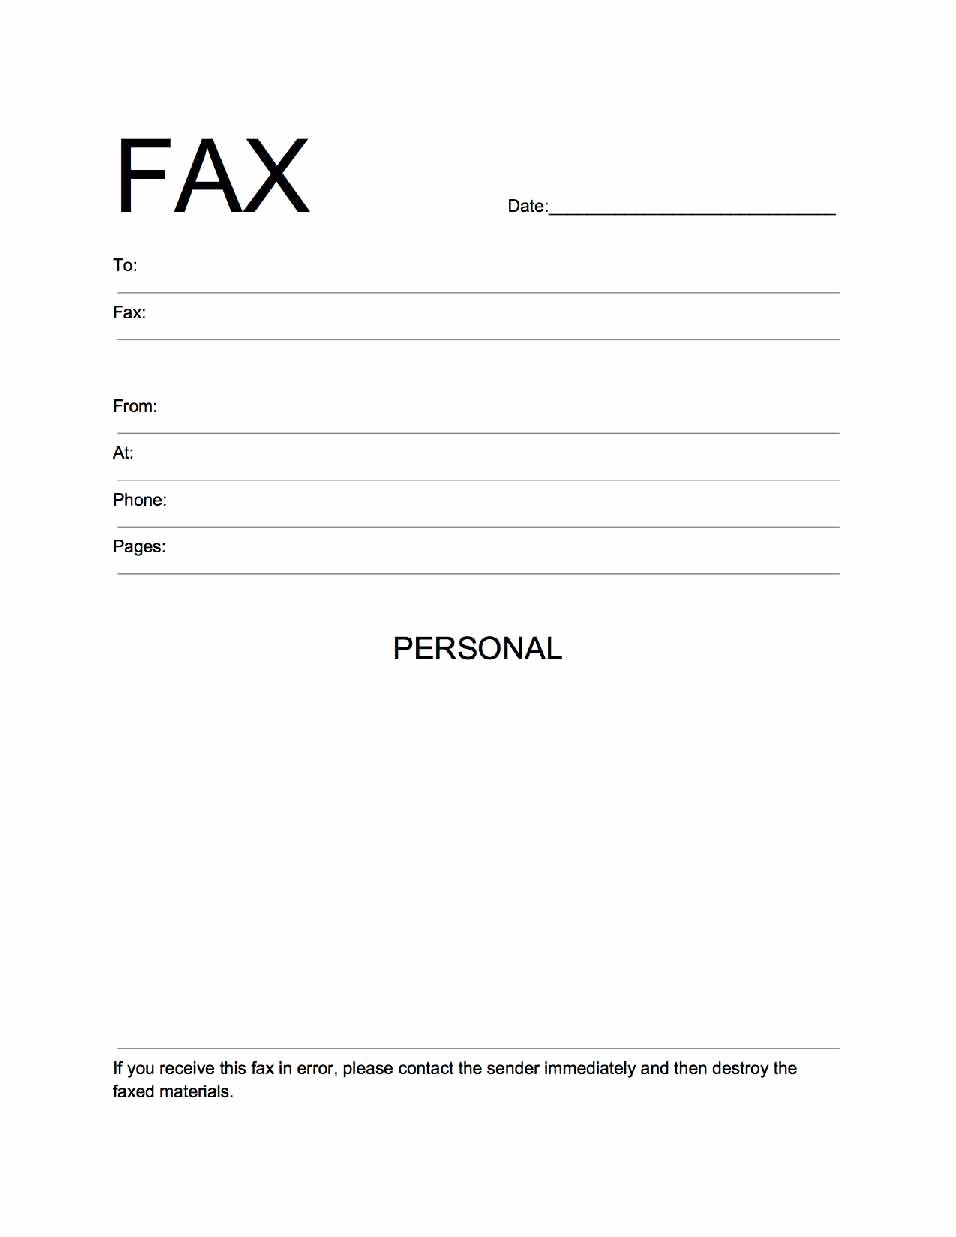 Sample Of Fax Cover Sheets Beautiful Free Fax Cover Sheet Template Download